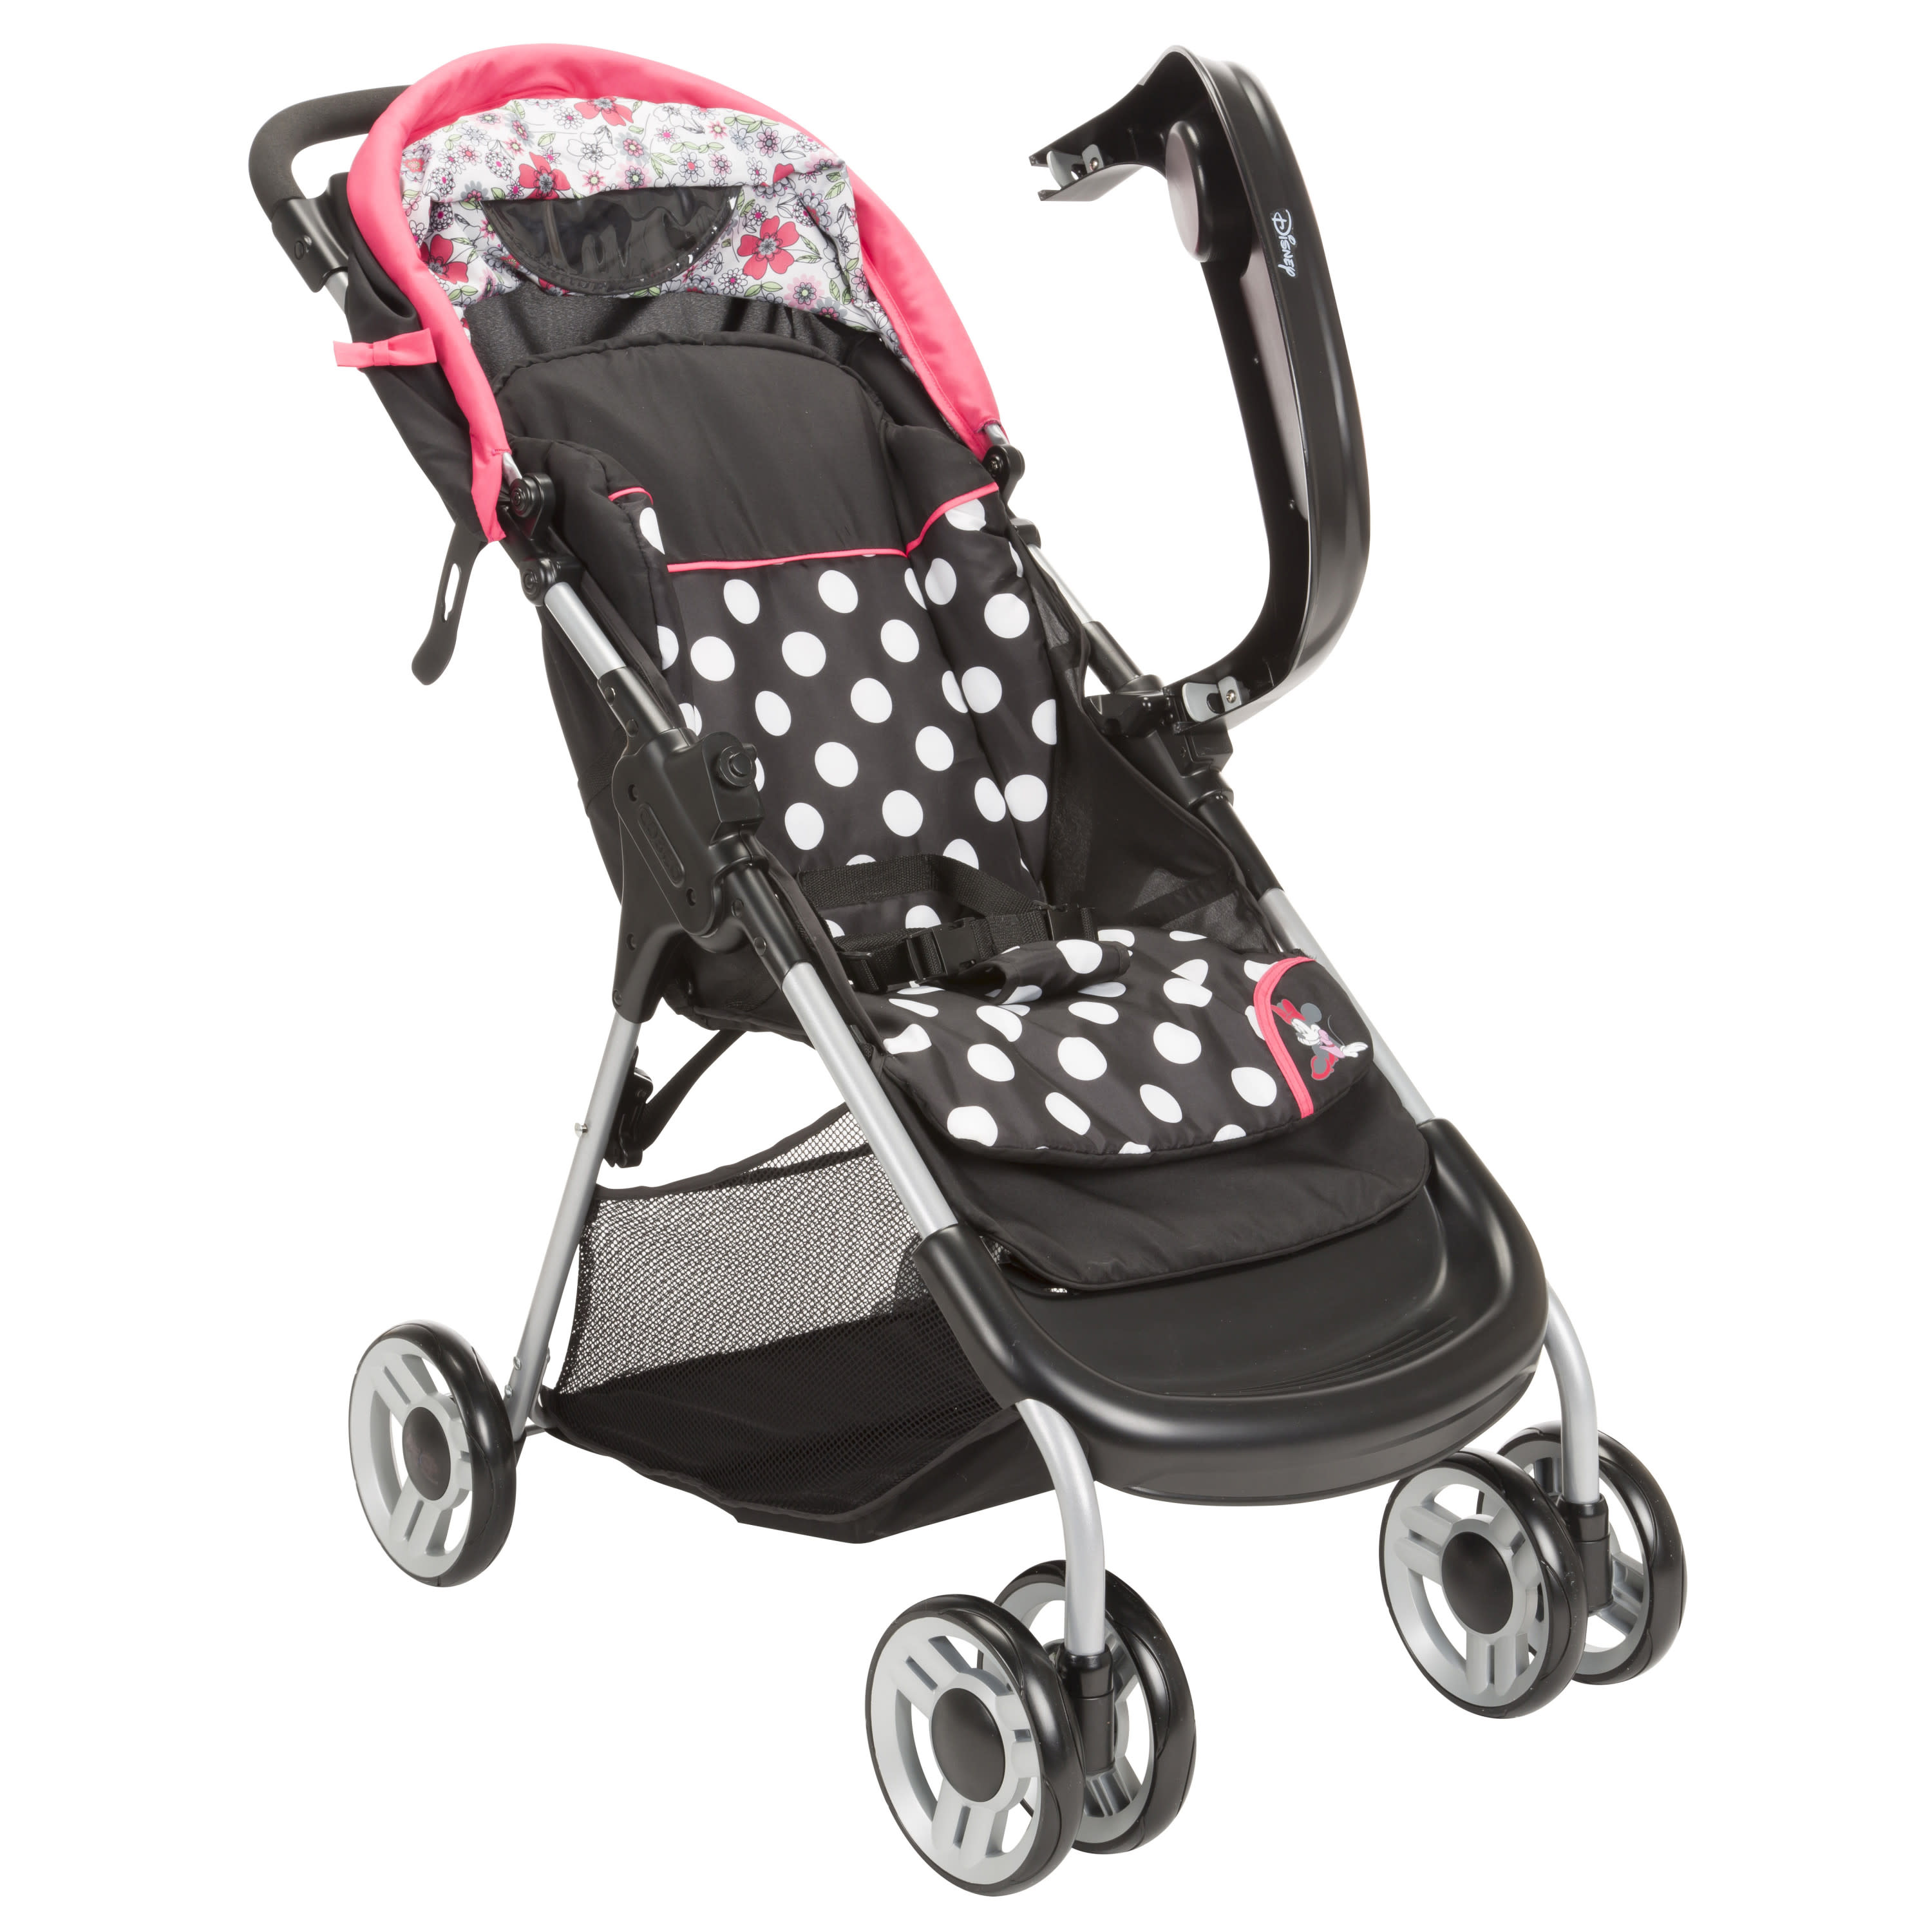 Disney Baby Lift & Stroll Plus Travel System, Minnie Coral Flowers - image 5 of 18